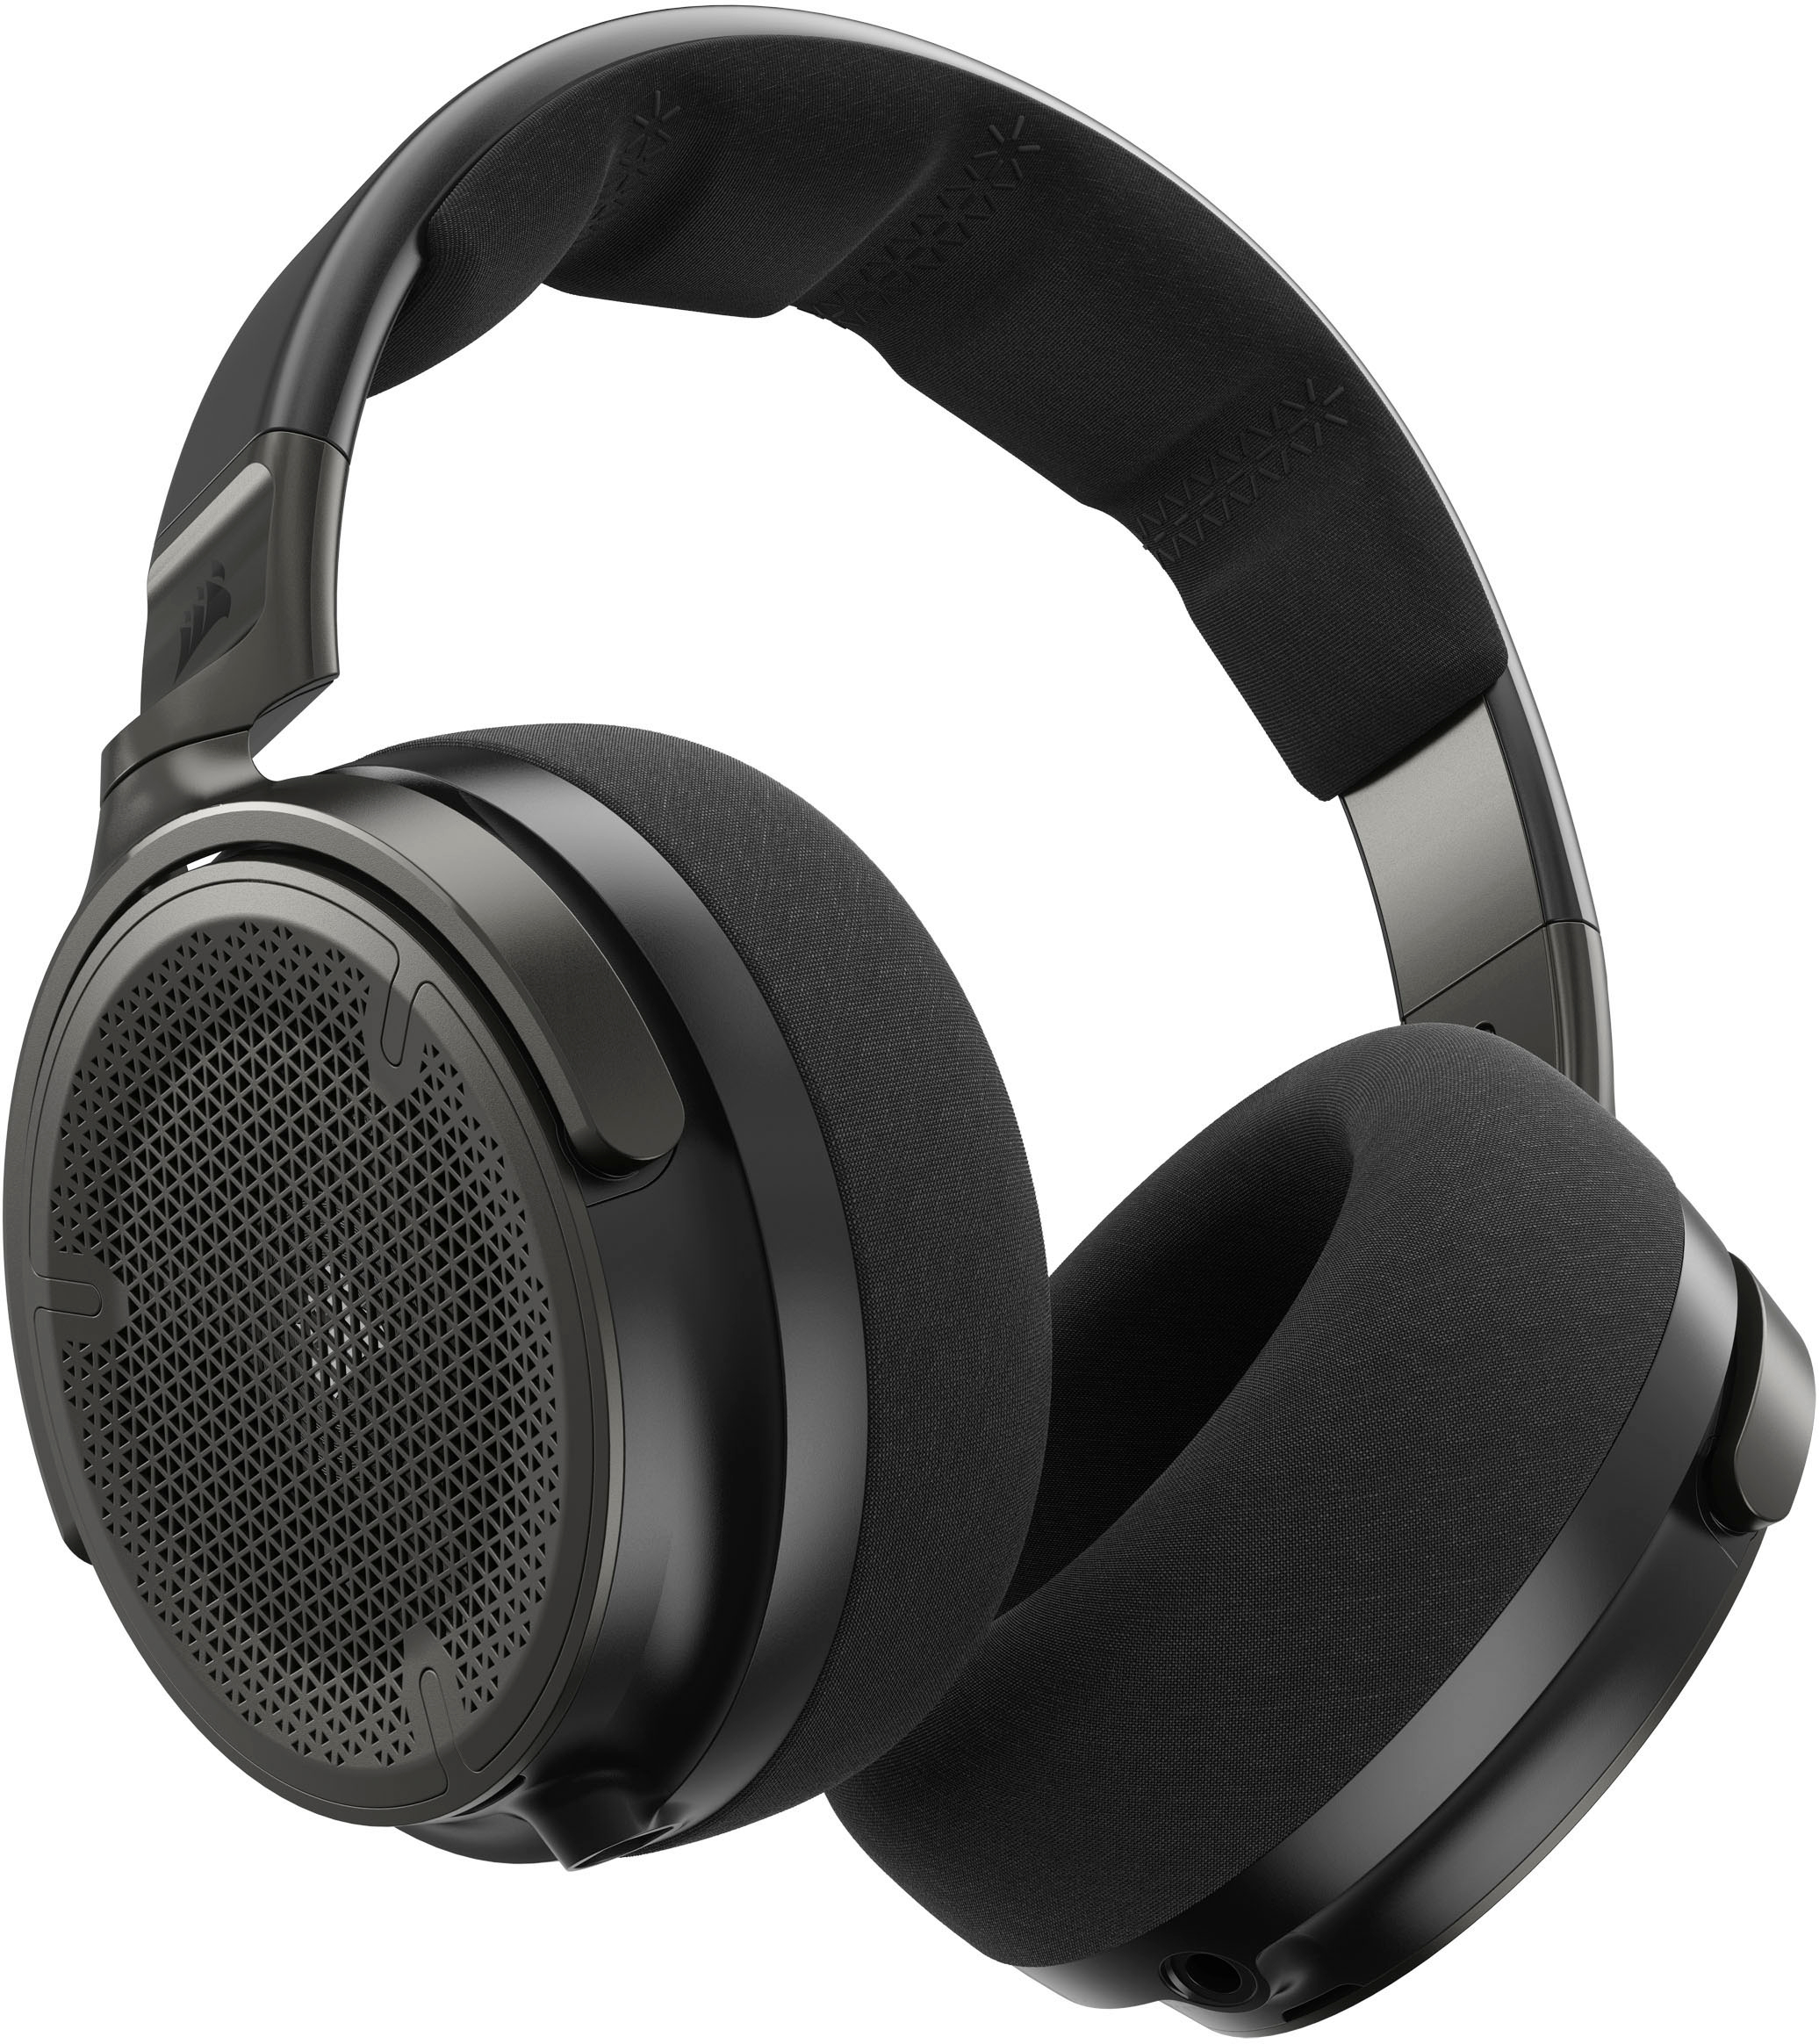 VIRTUOSO - Headset CORSAIR Best Buy Wired Carbon Back PRO Open Streaming/Gaming CA-9011370-NA